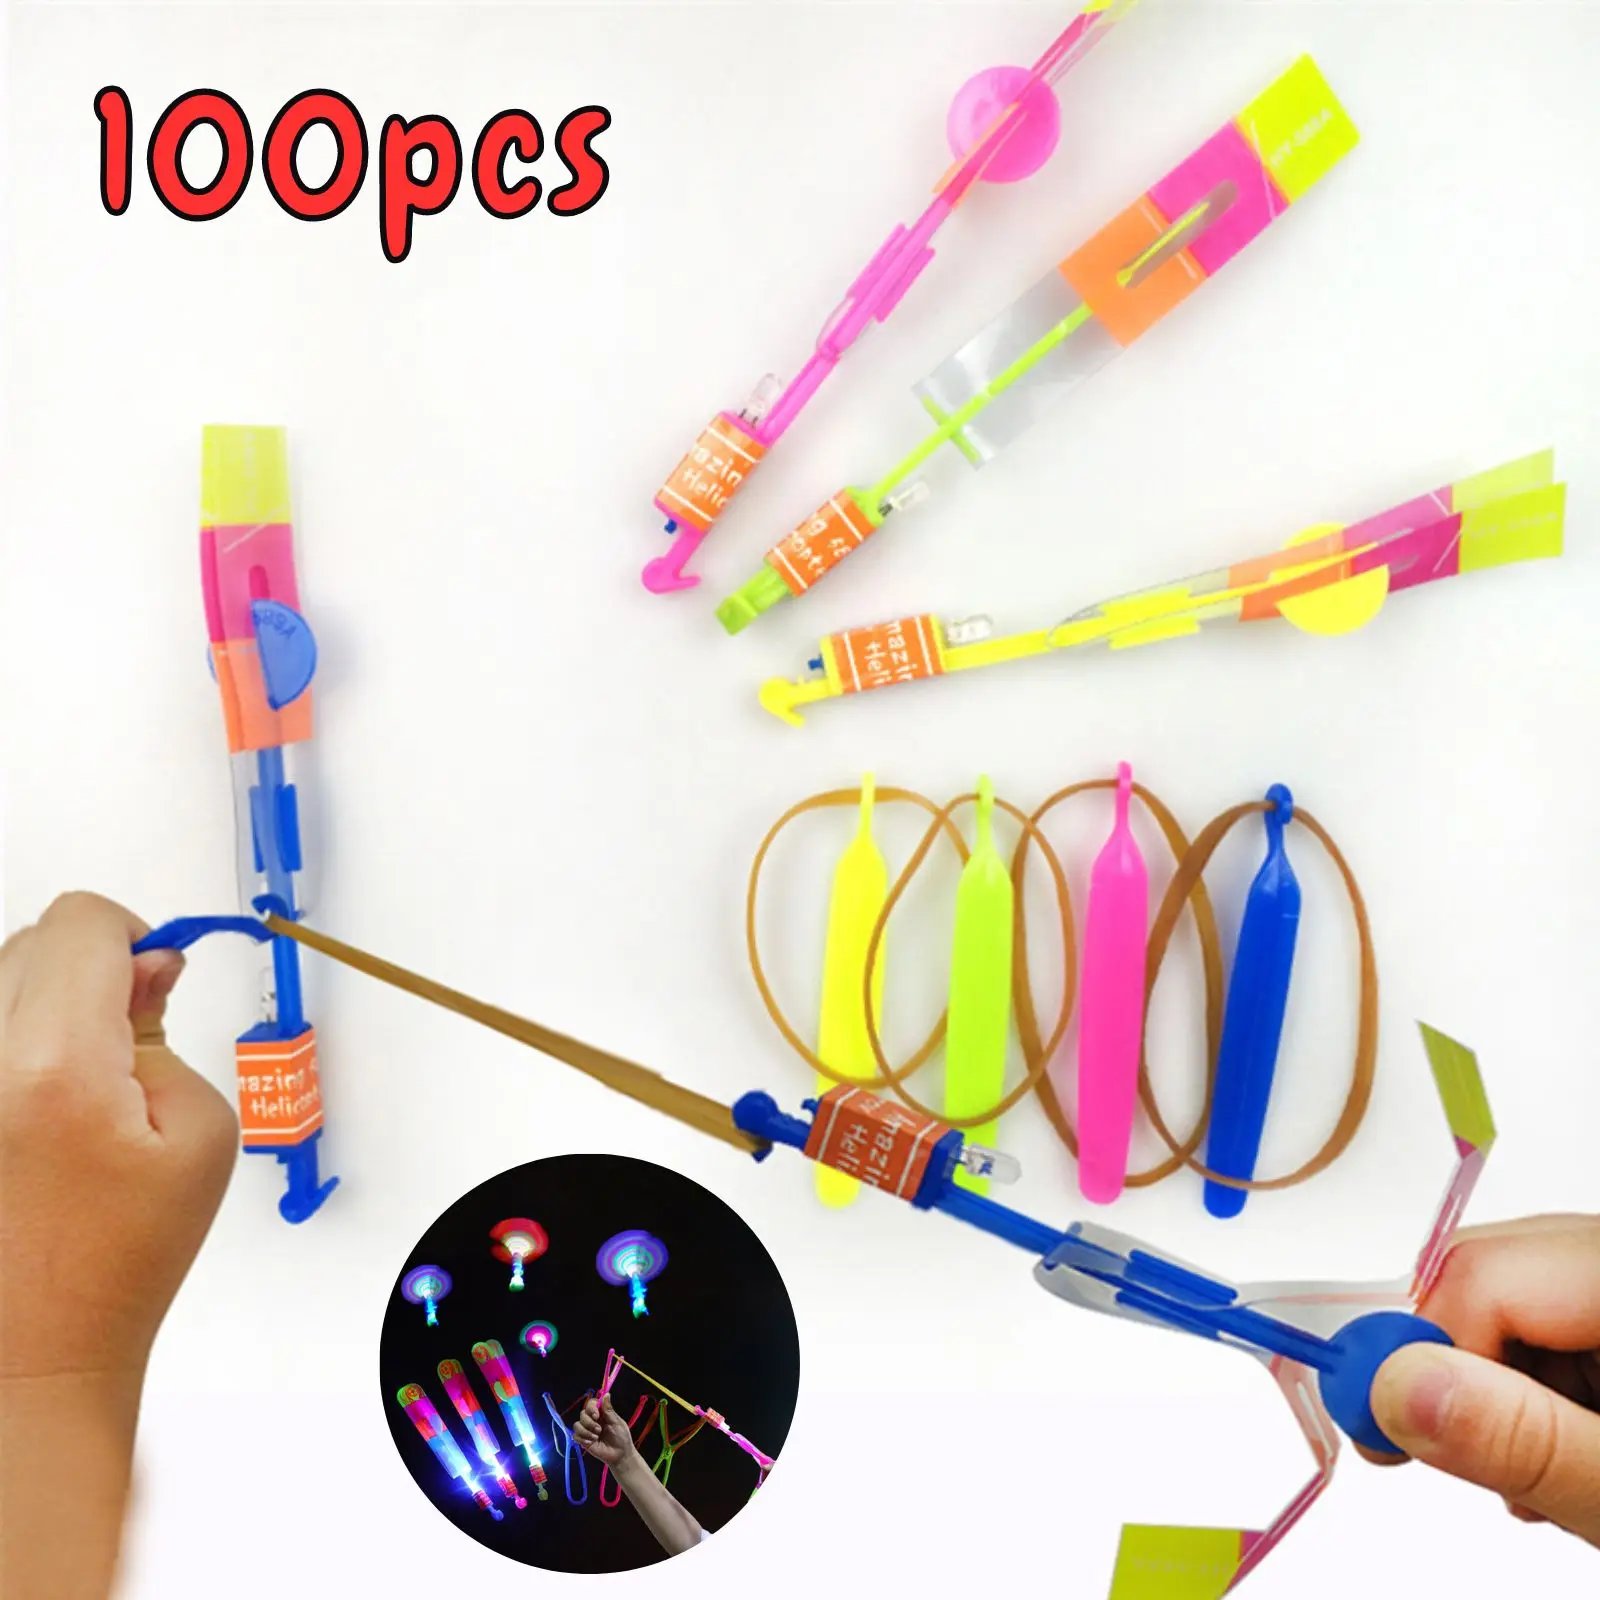 

100PCS Amazing Light Toy Arrow Rocket Helicopter Flying Toy Led Light Toys Party Fun Gift Rubber Band Catapult Gift For Boy Girl